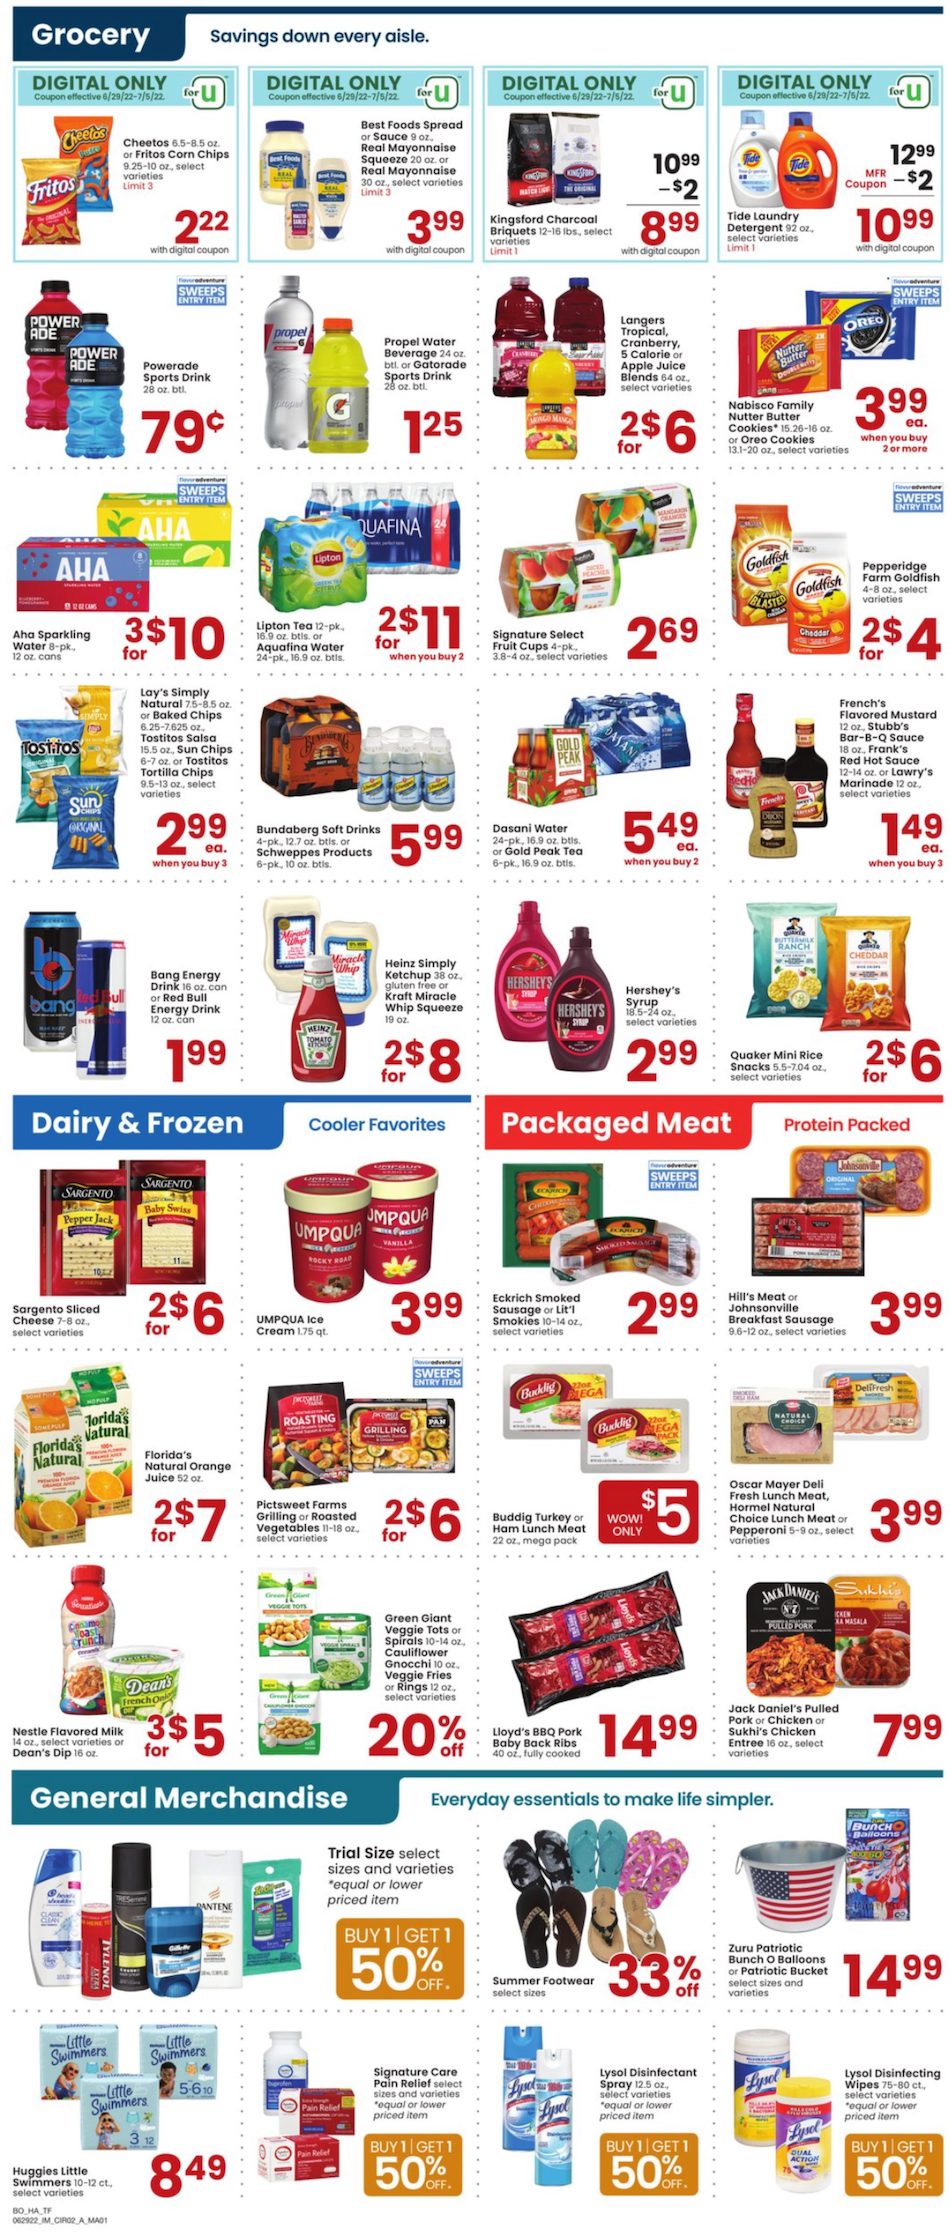 Albertsons Weekly Ad